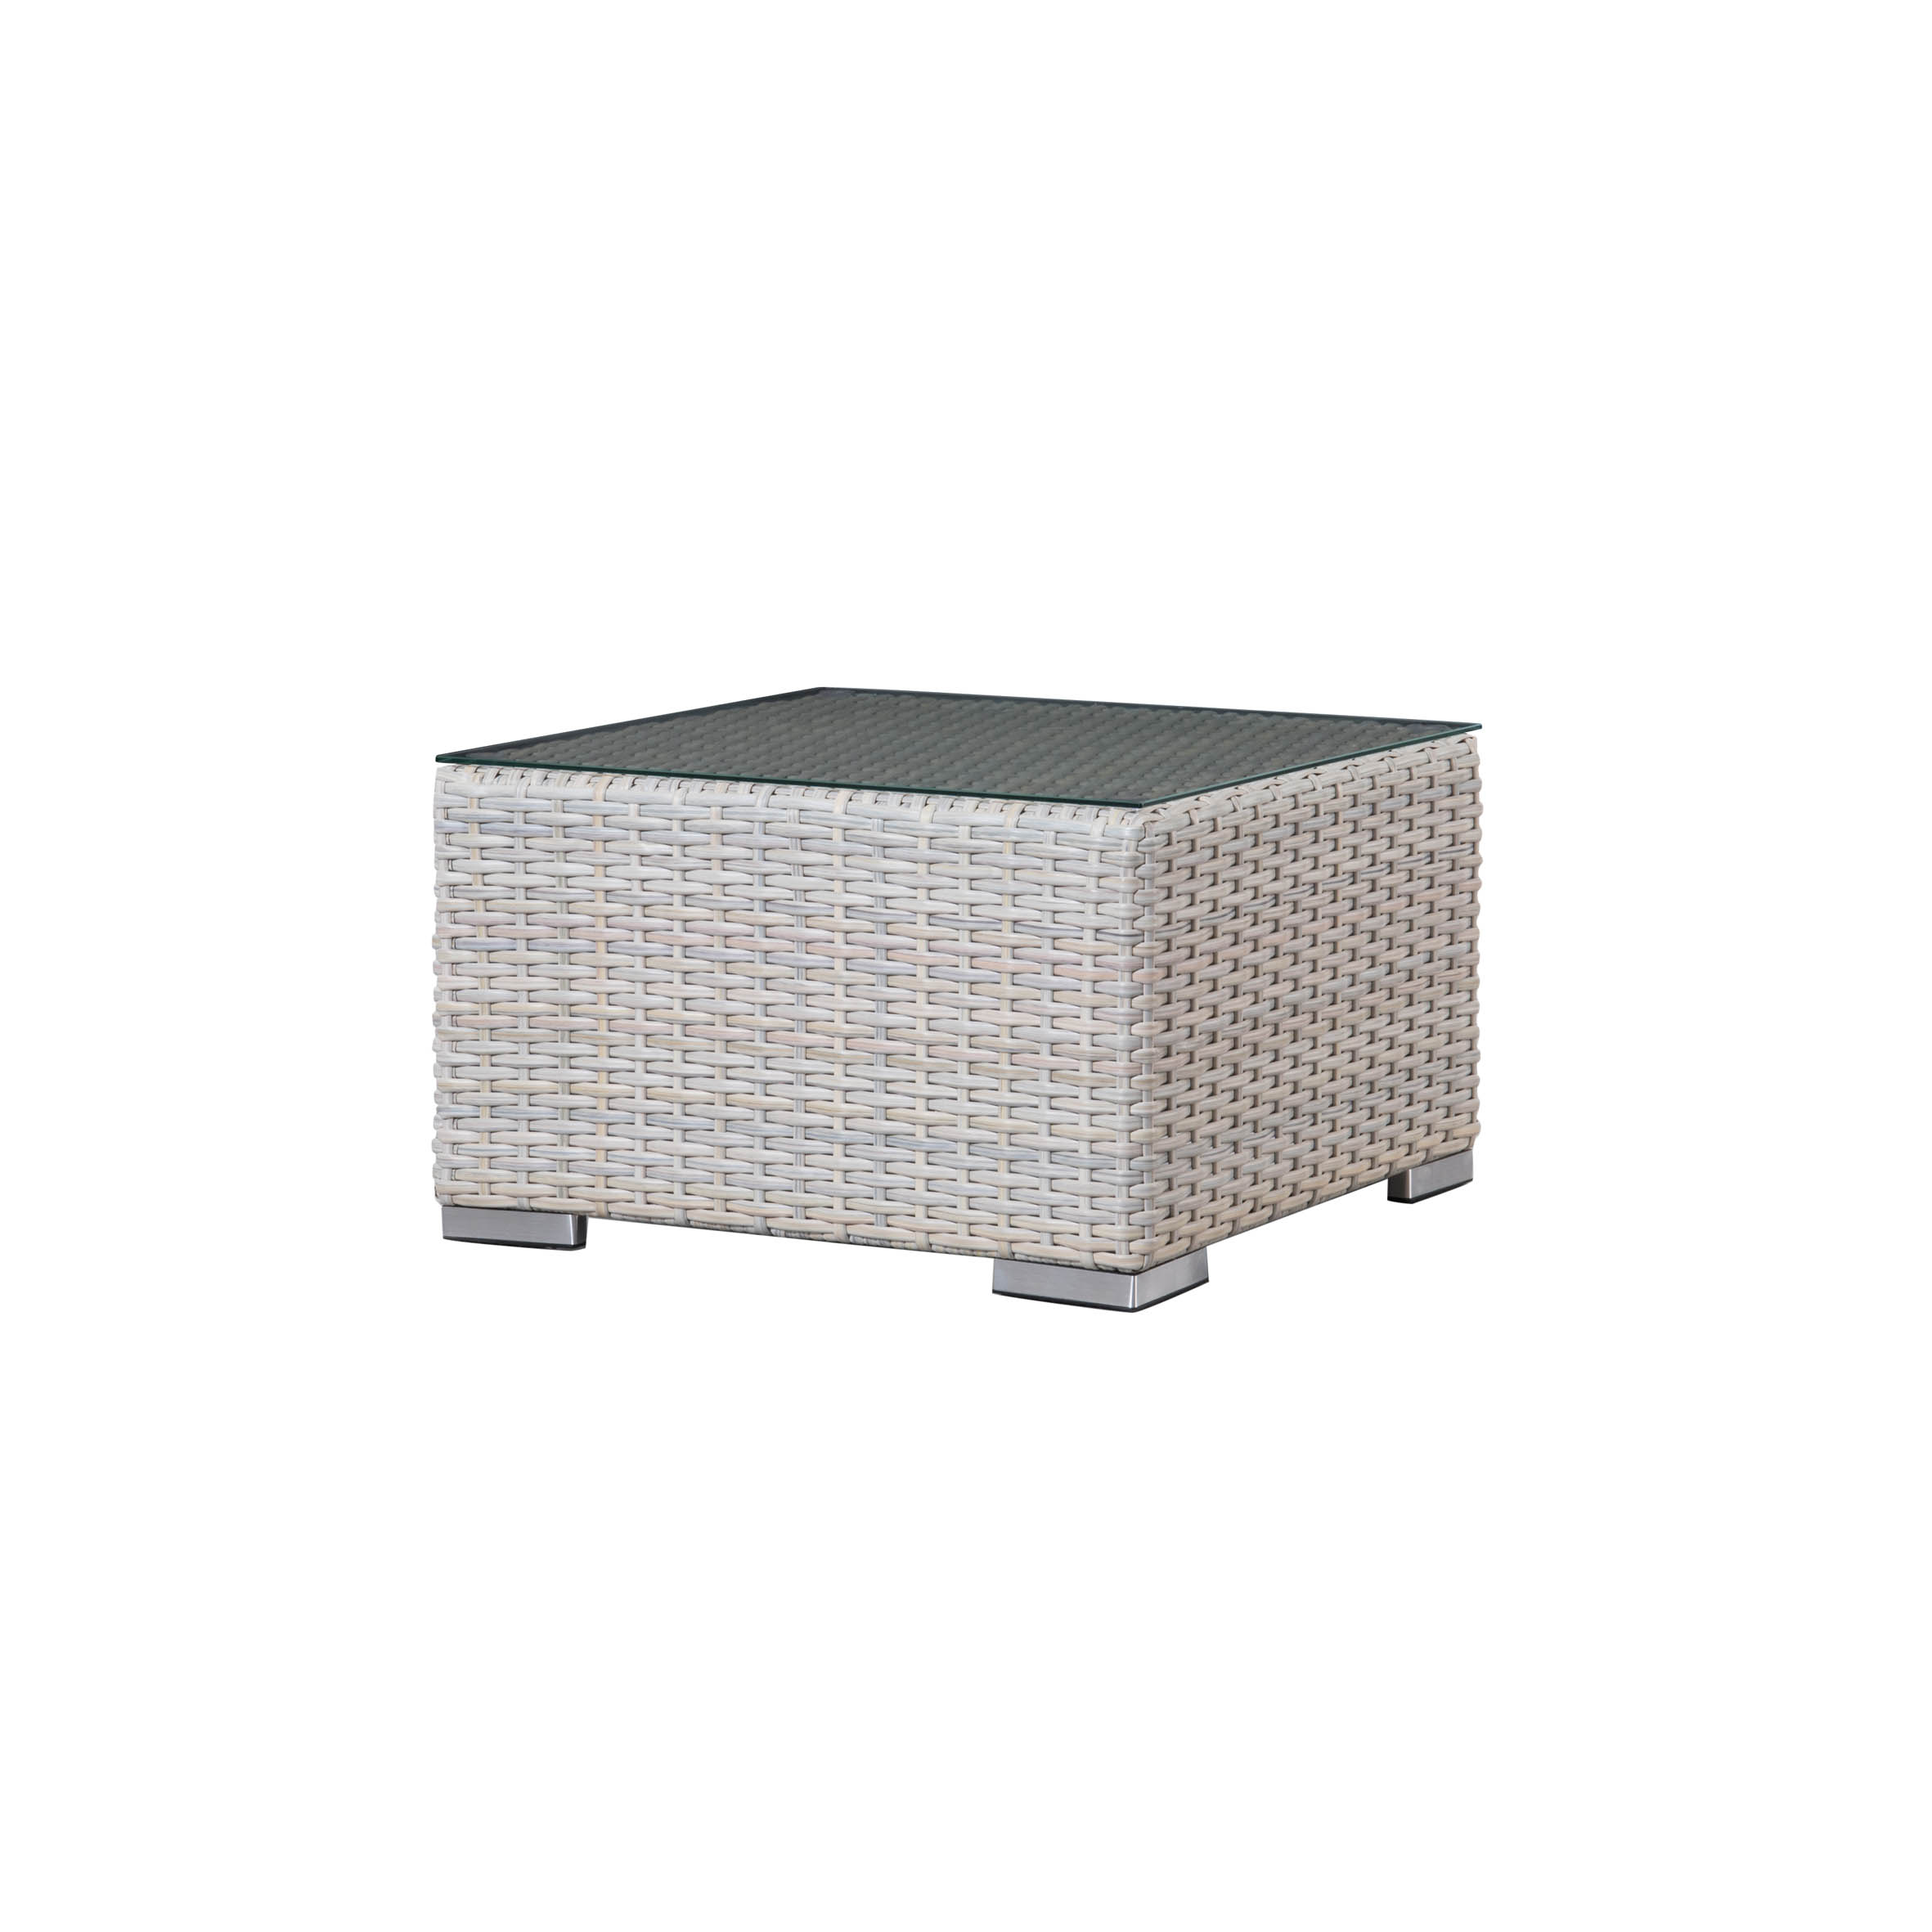 Ideal rattan square coffee table S1